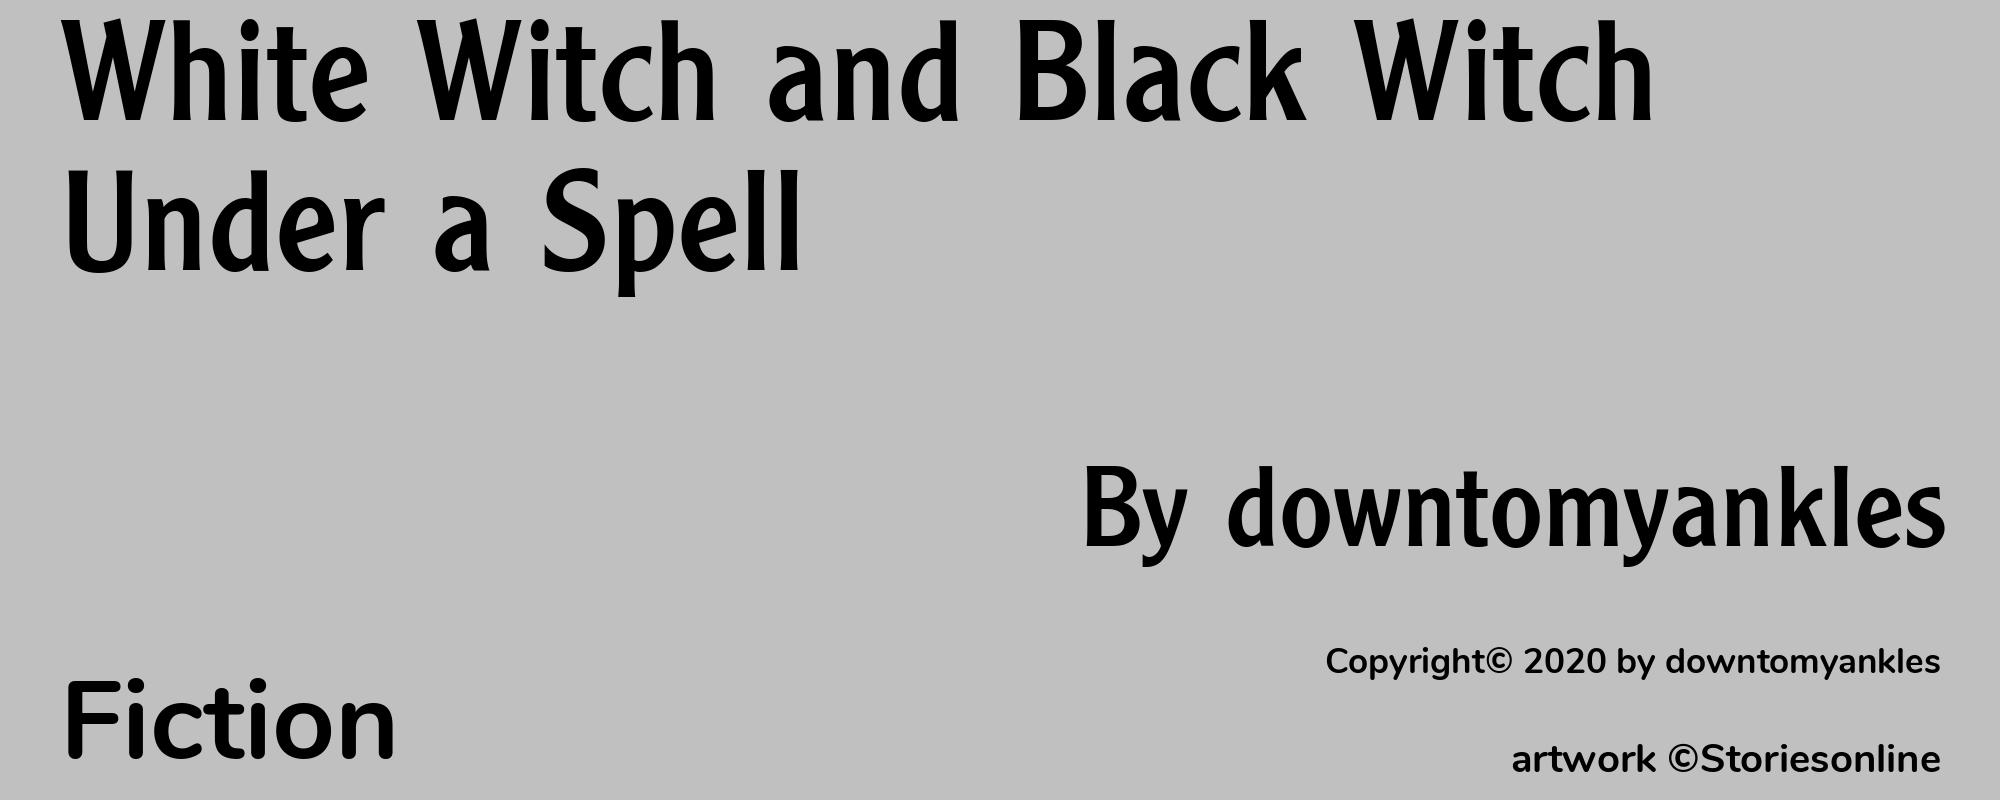 White Witch and Black Witch Under a Spell - Cover